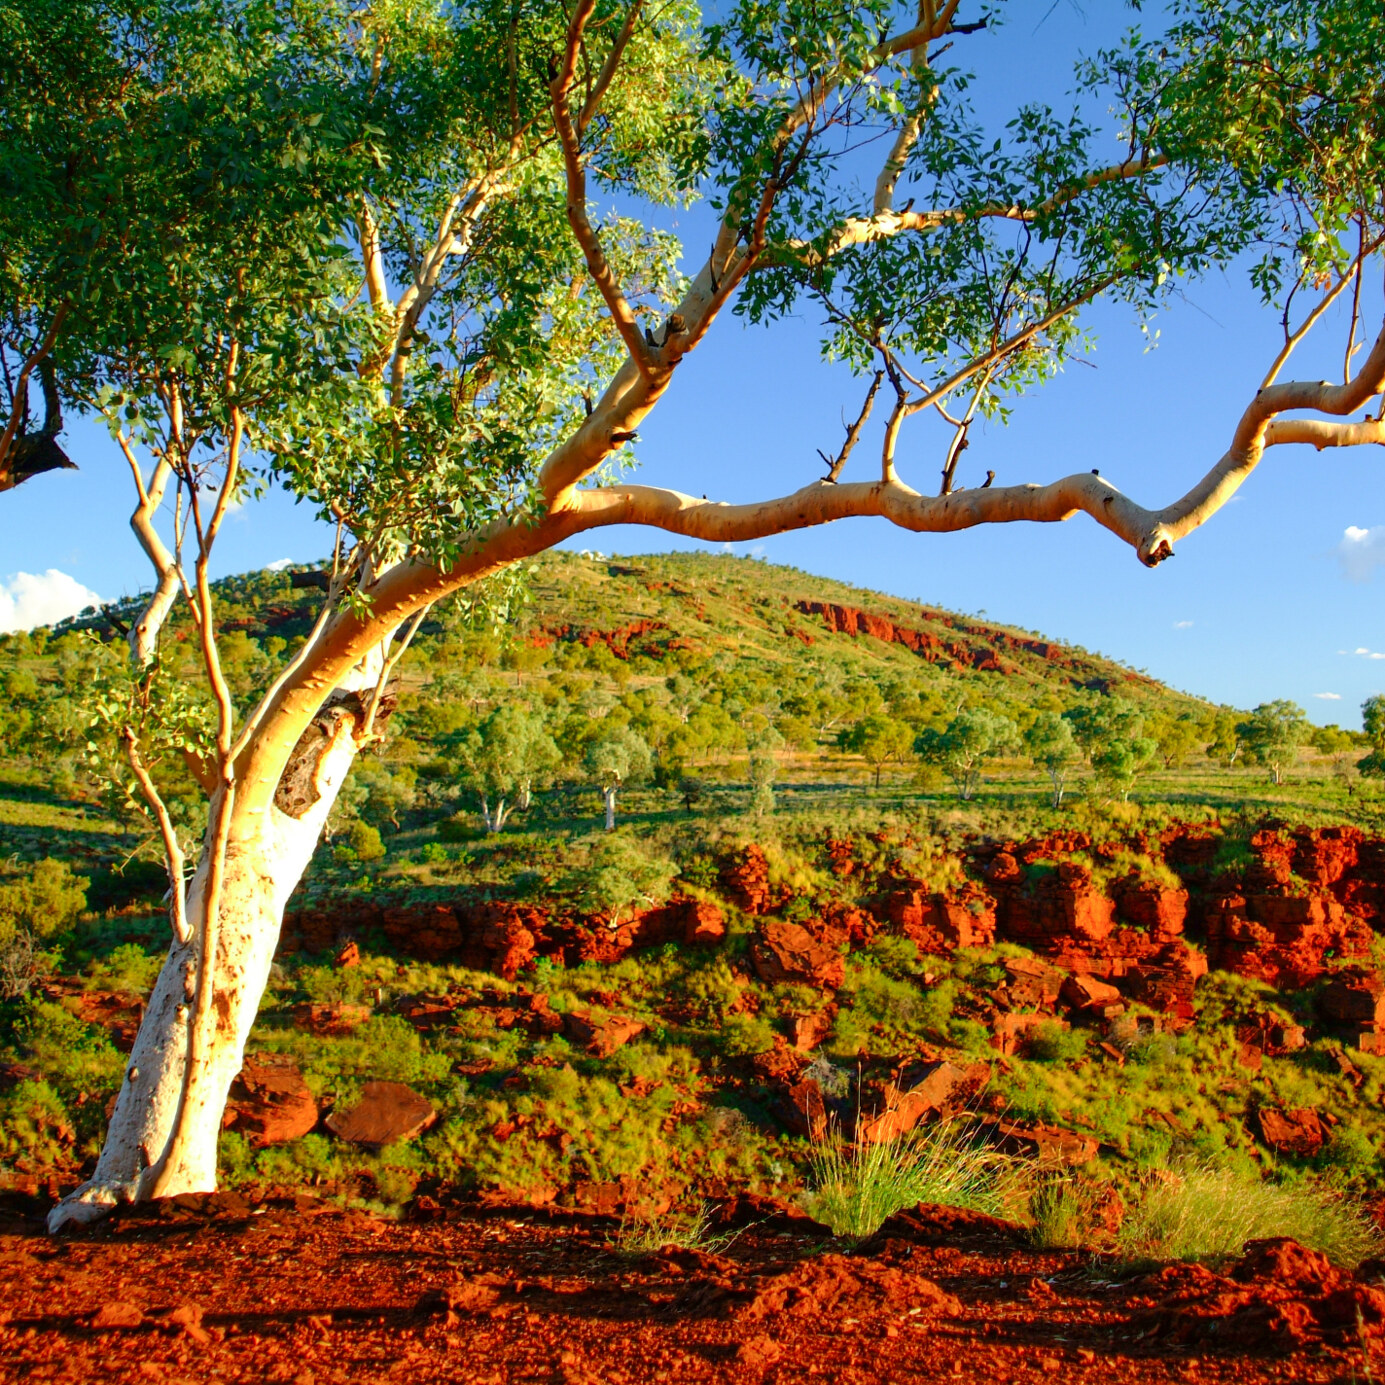 Bright green foliage against the rich red soil of Karijini National Park in the Pilbara WA photographed on a bright sunny day